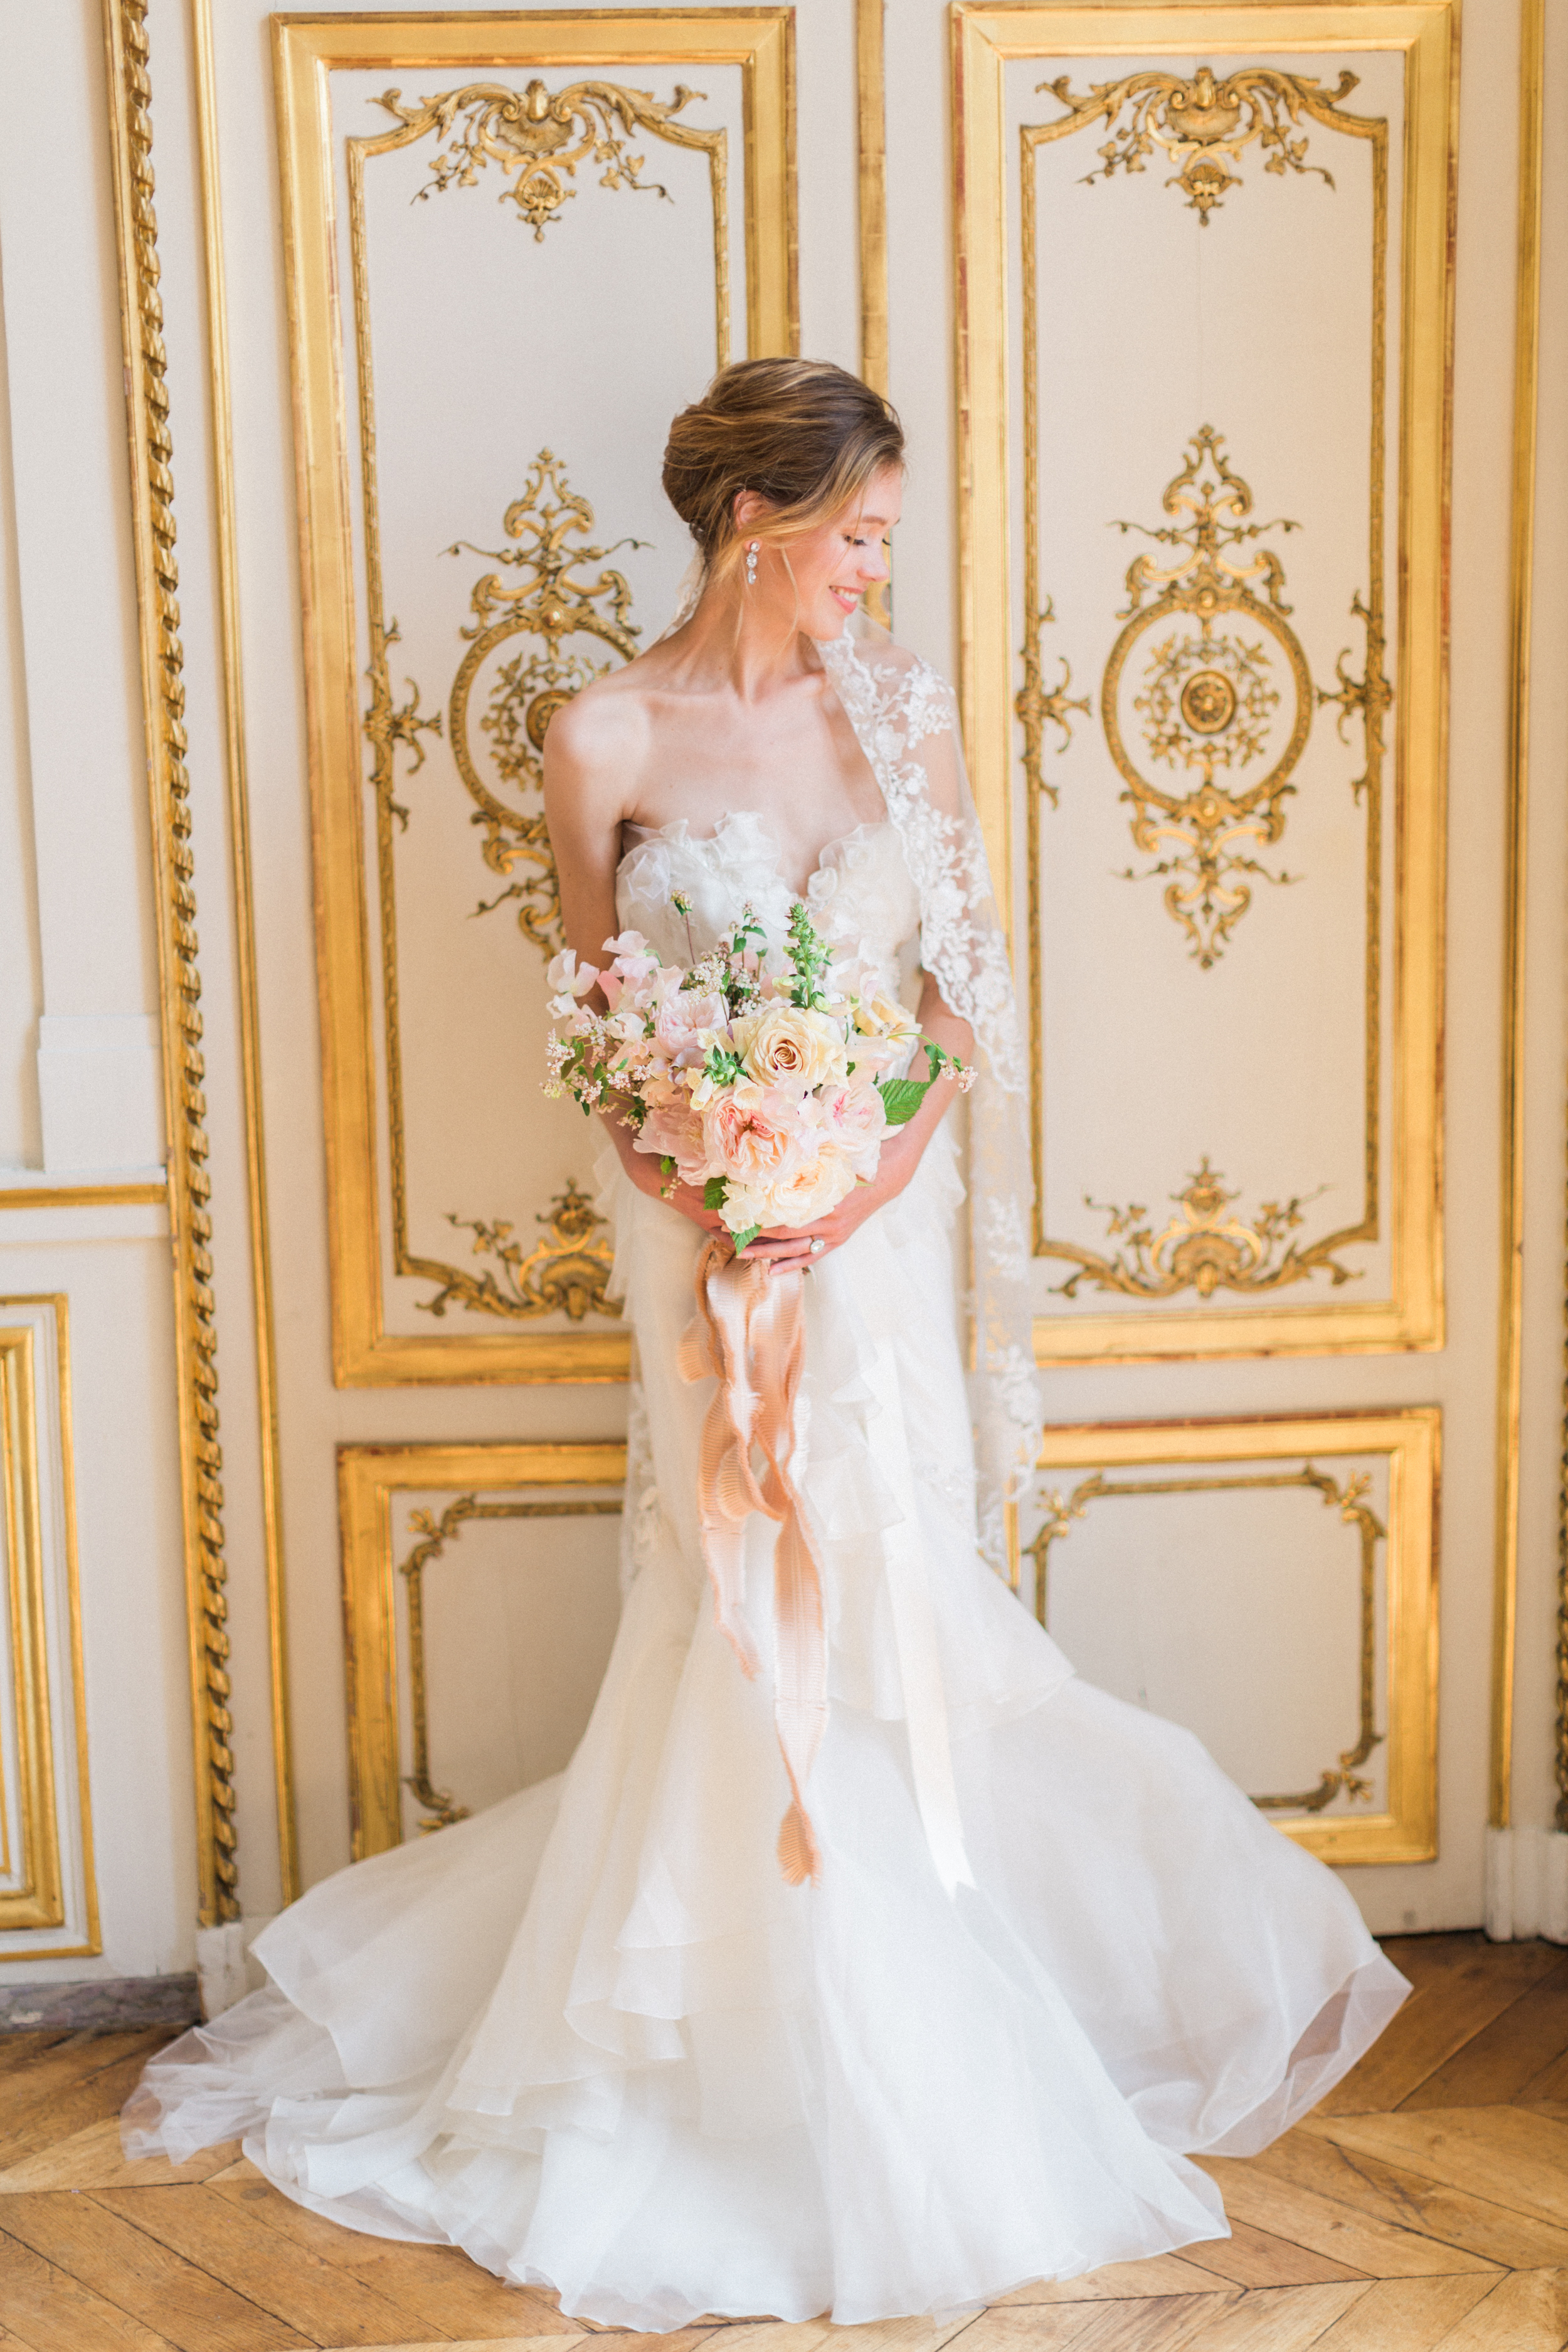 Bridal portrait at Vendome with Gold molding accents